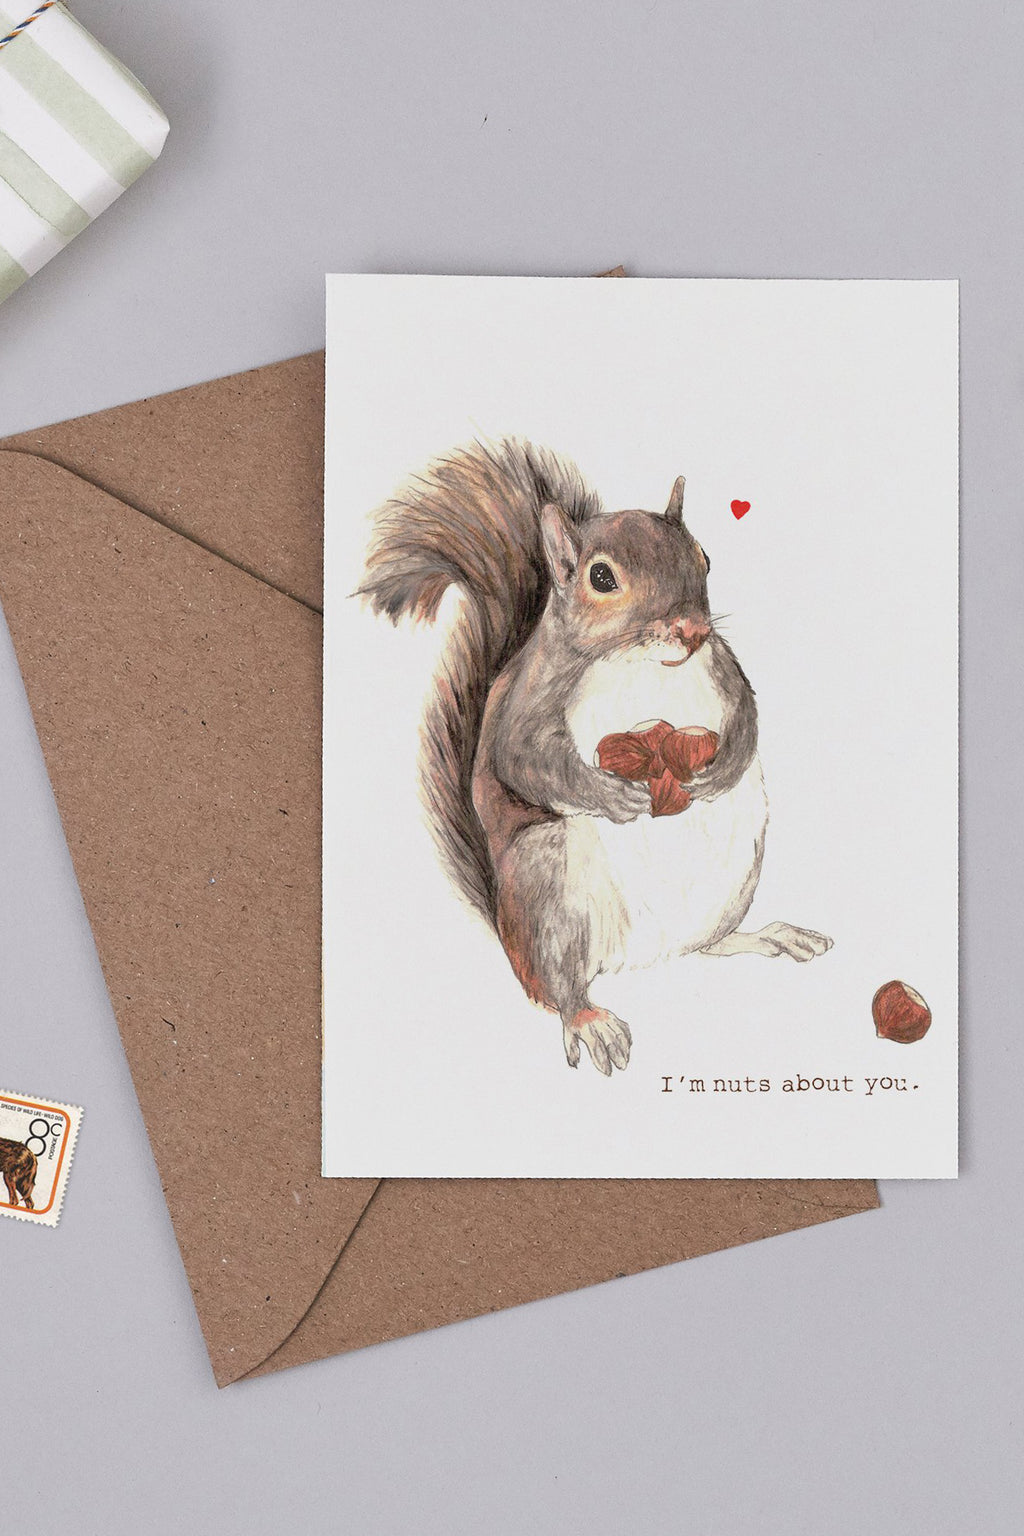 Mister Peebles Nuts About You Card - The Mercantile London